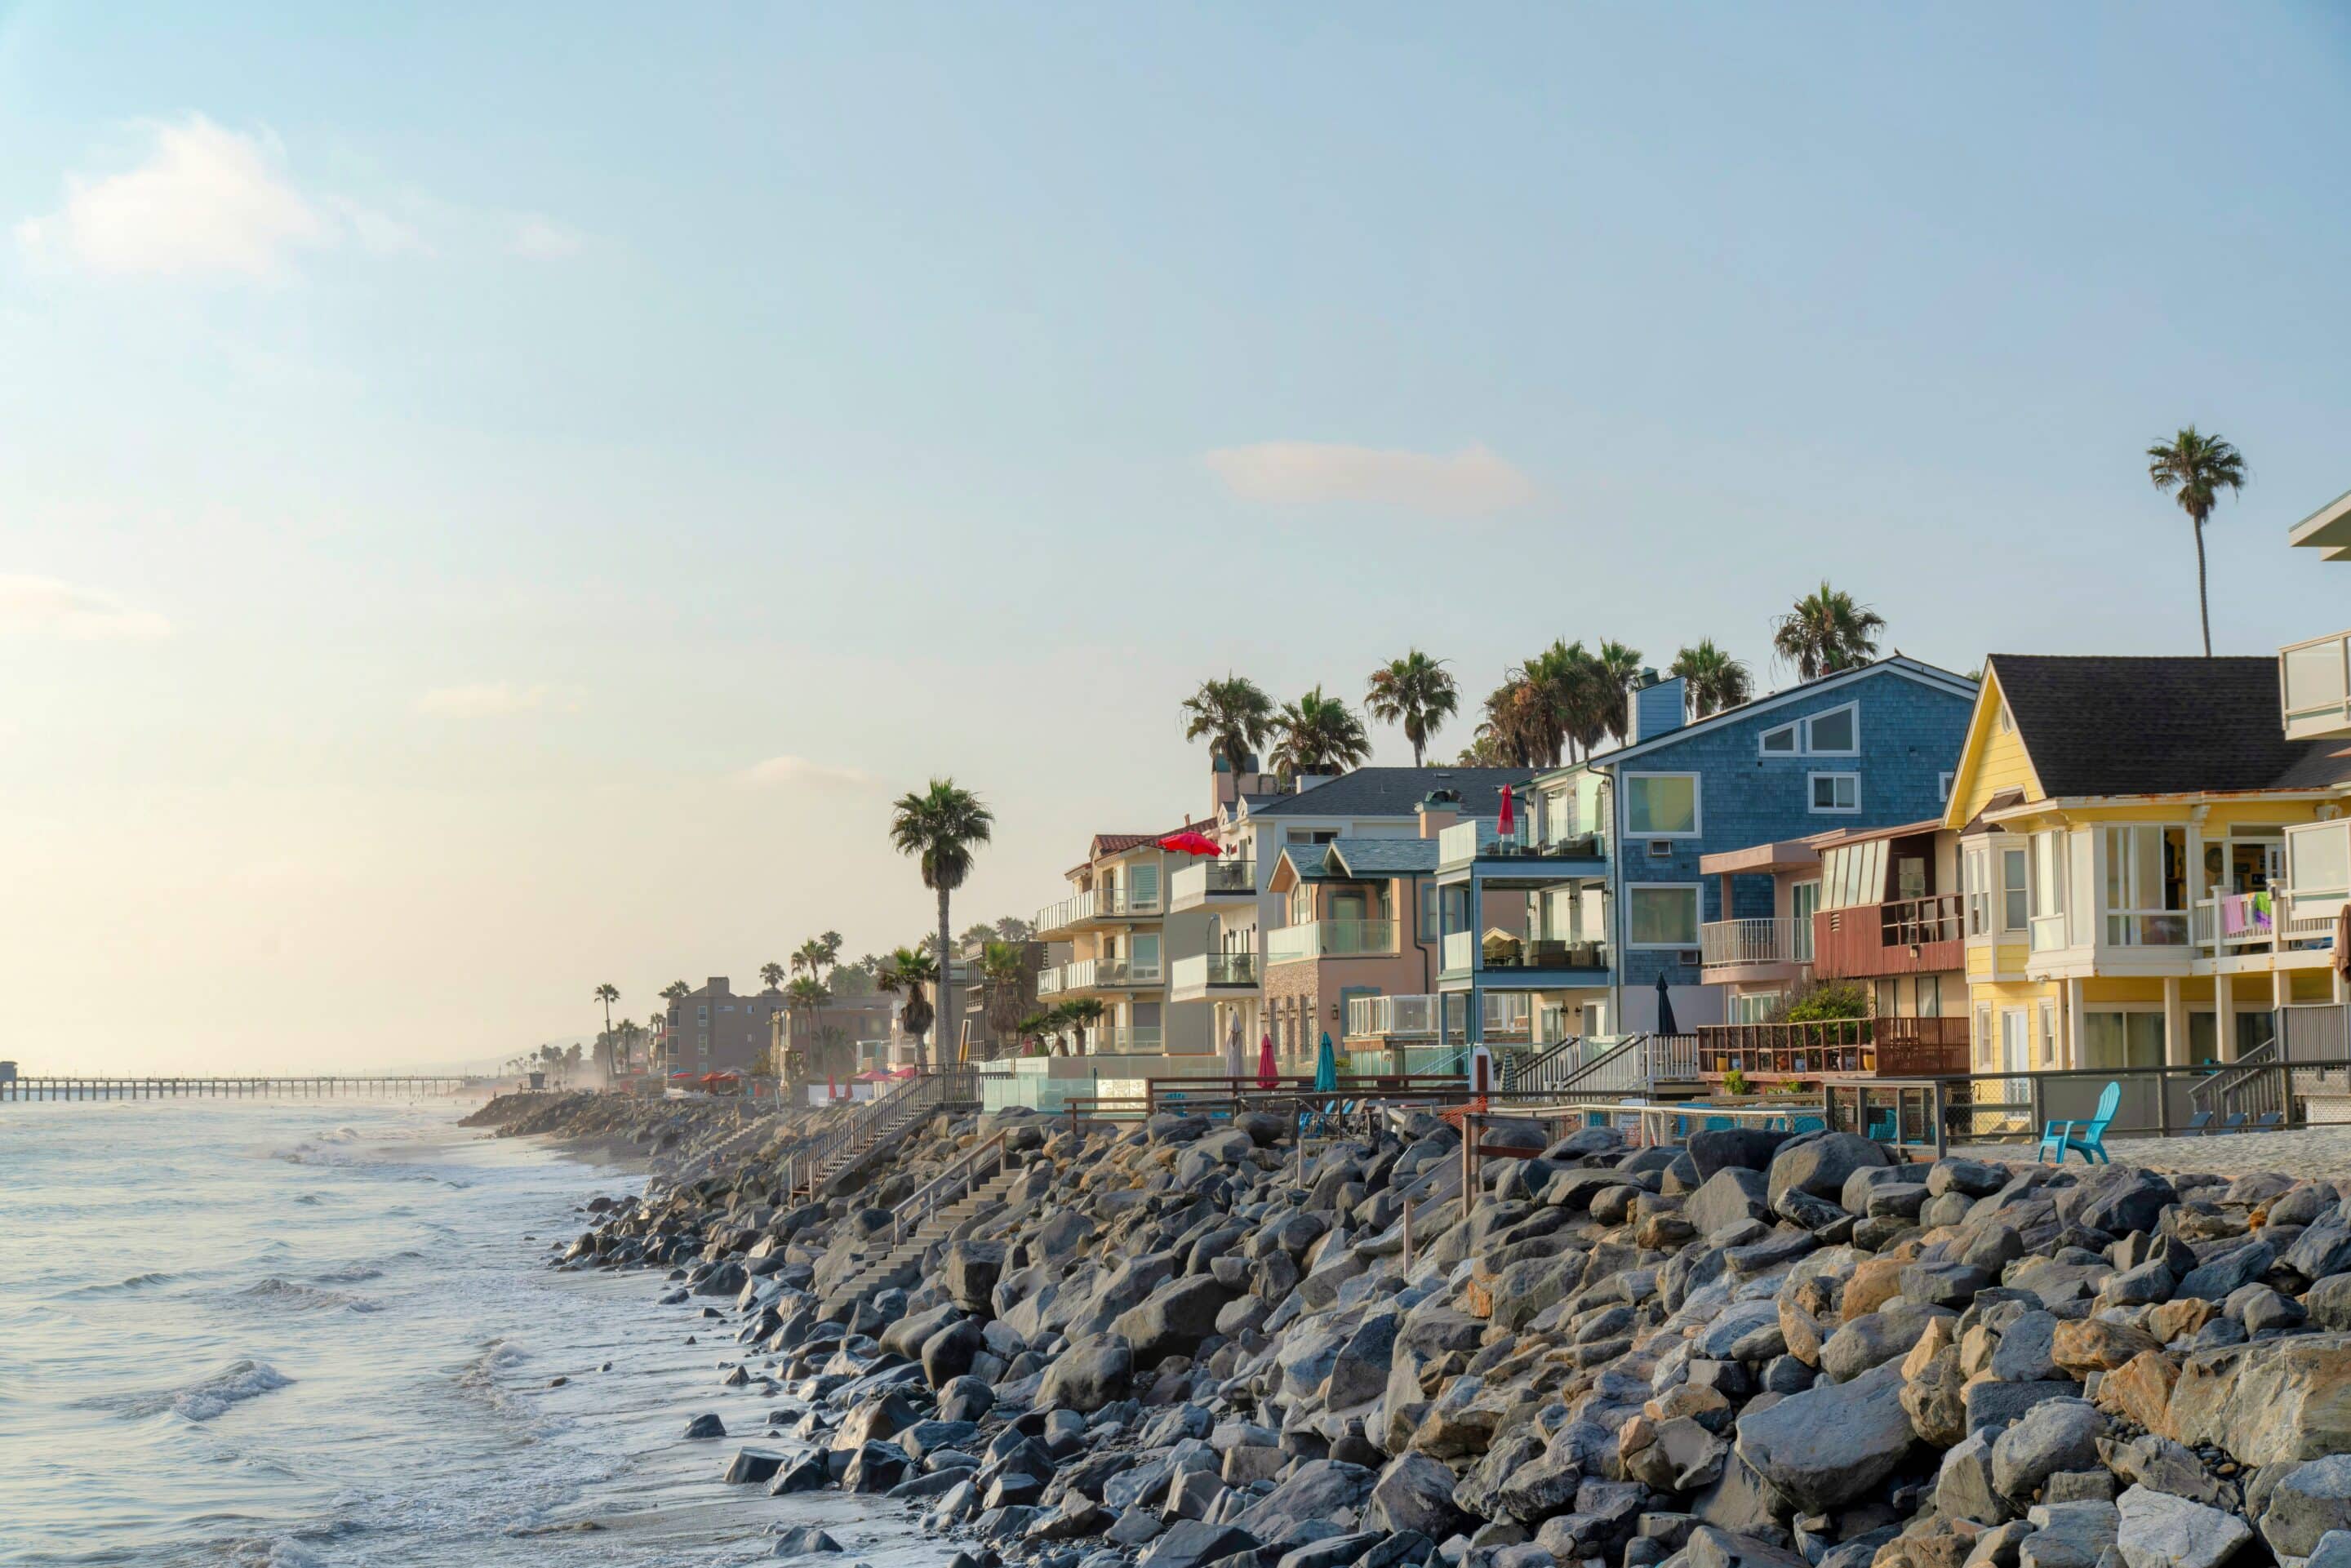 Colorful coastal homes along a beach, emphasizing the flood insurance cost for such areas.